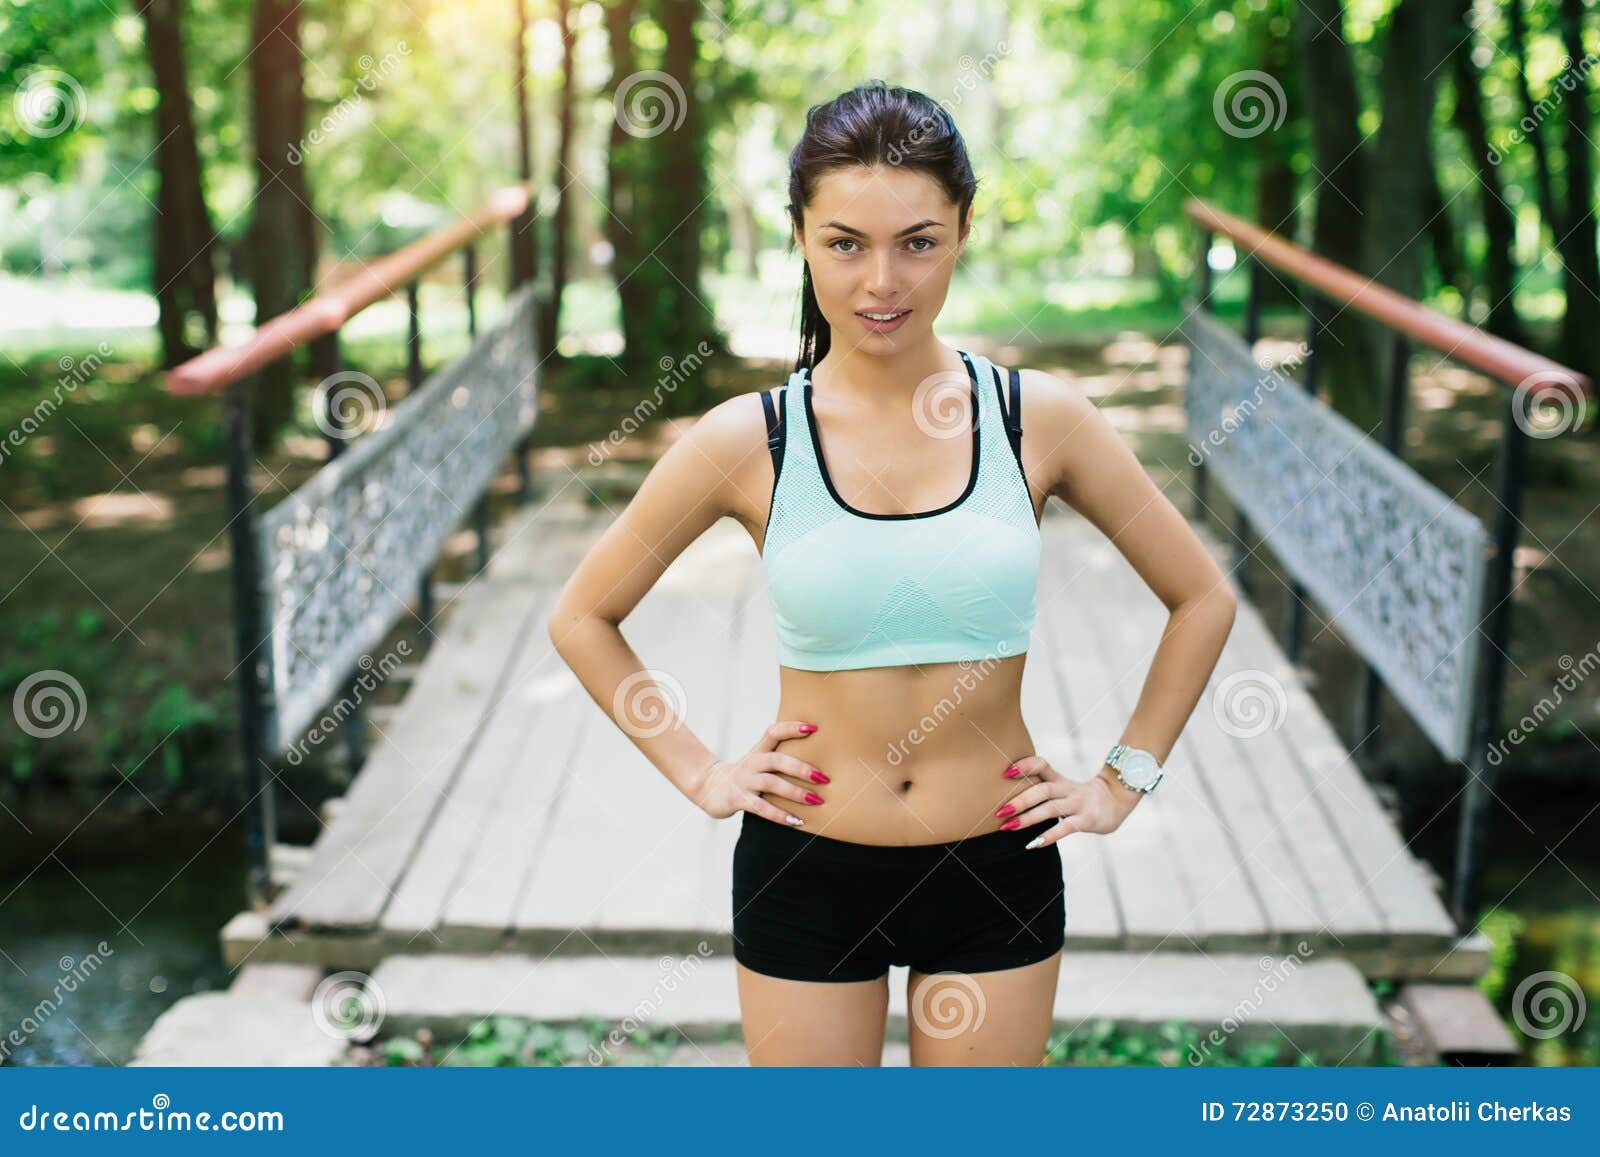 Sexual Sports Girl Playing Sports Outdoors Stock Photo - Image of girls ...